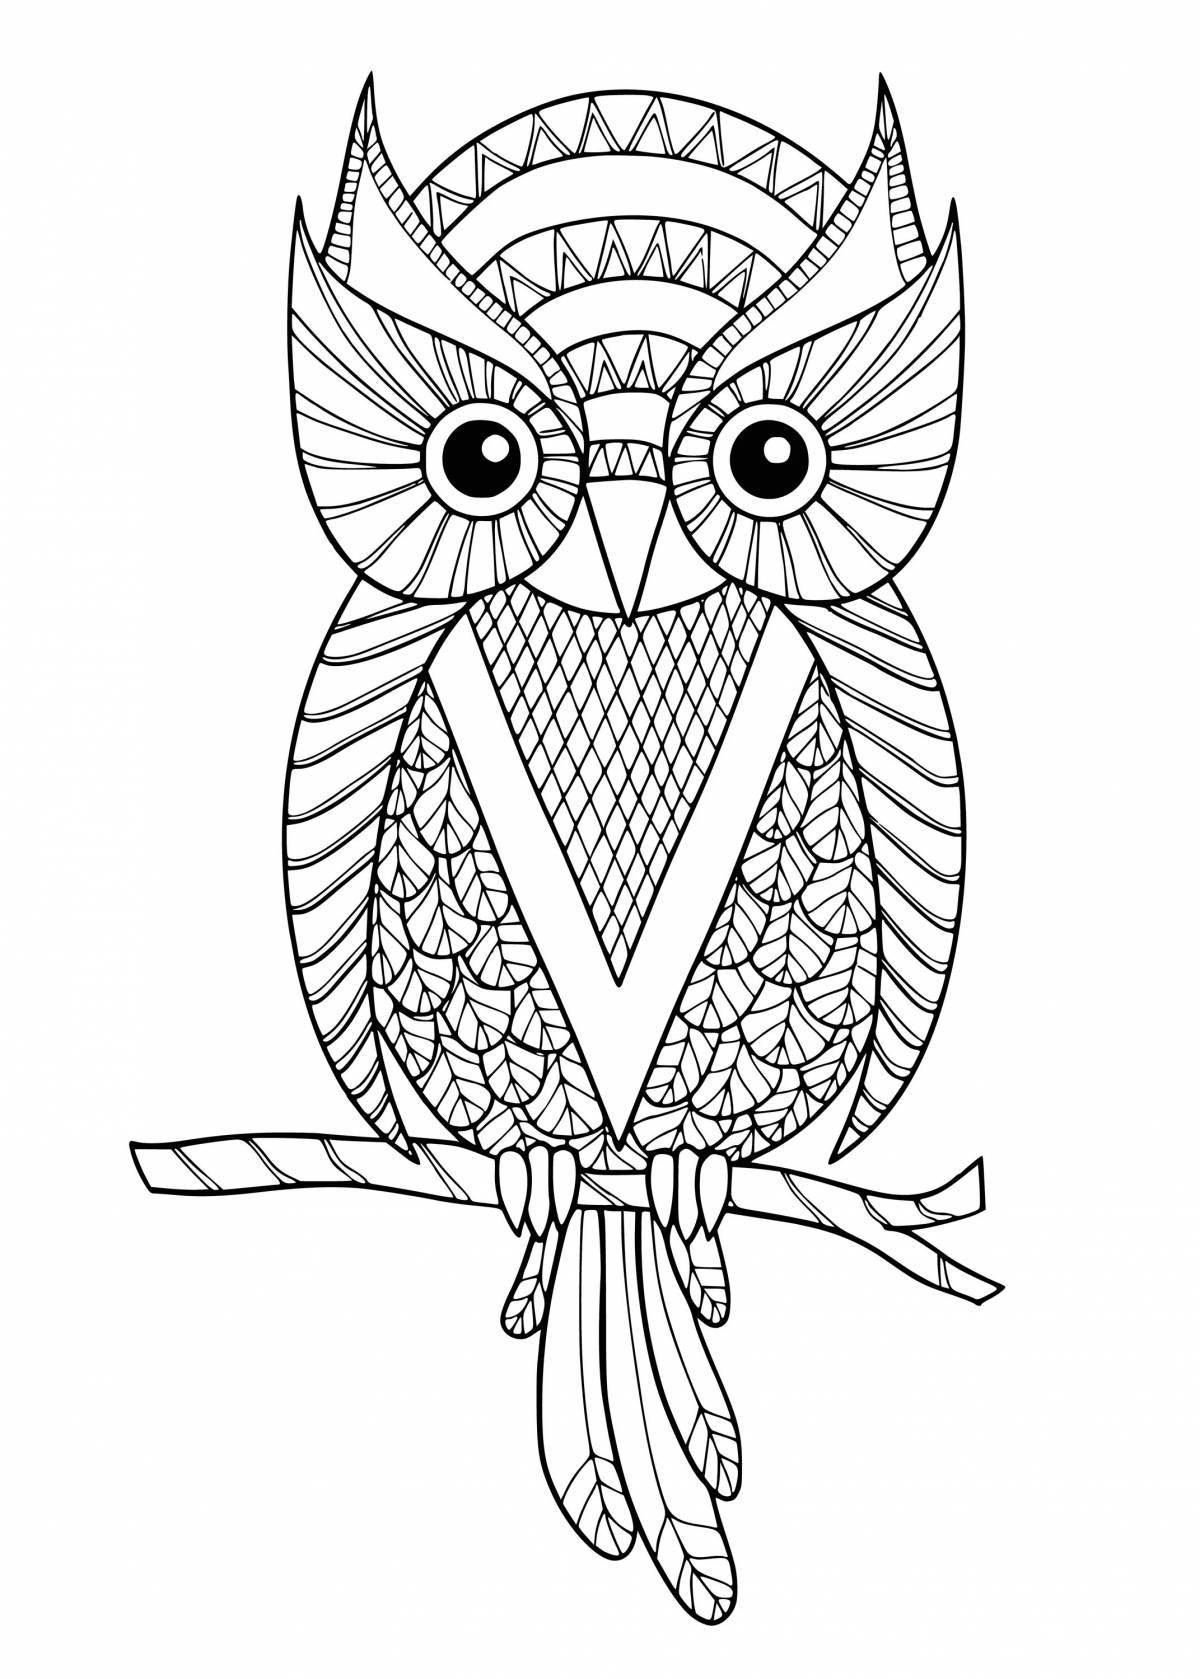 Fluffy cute owl coloring book